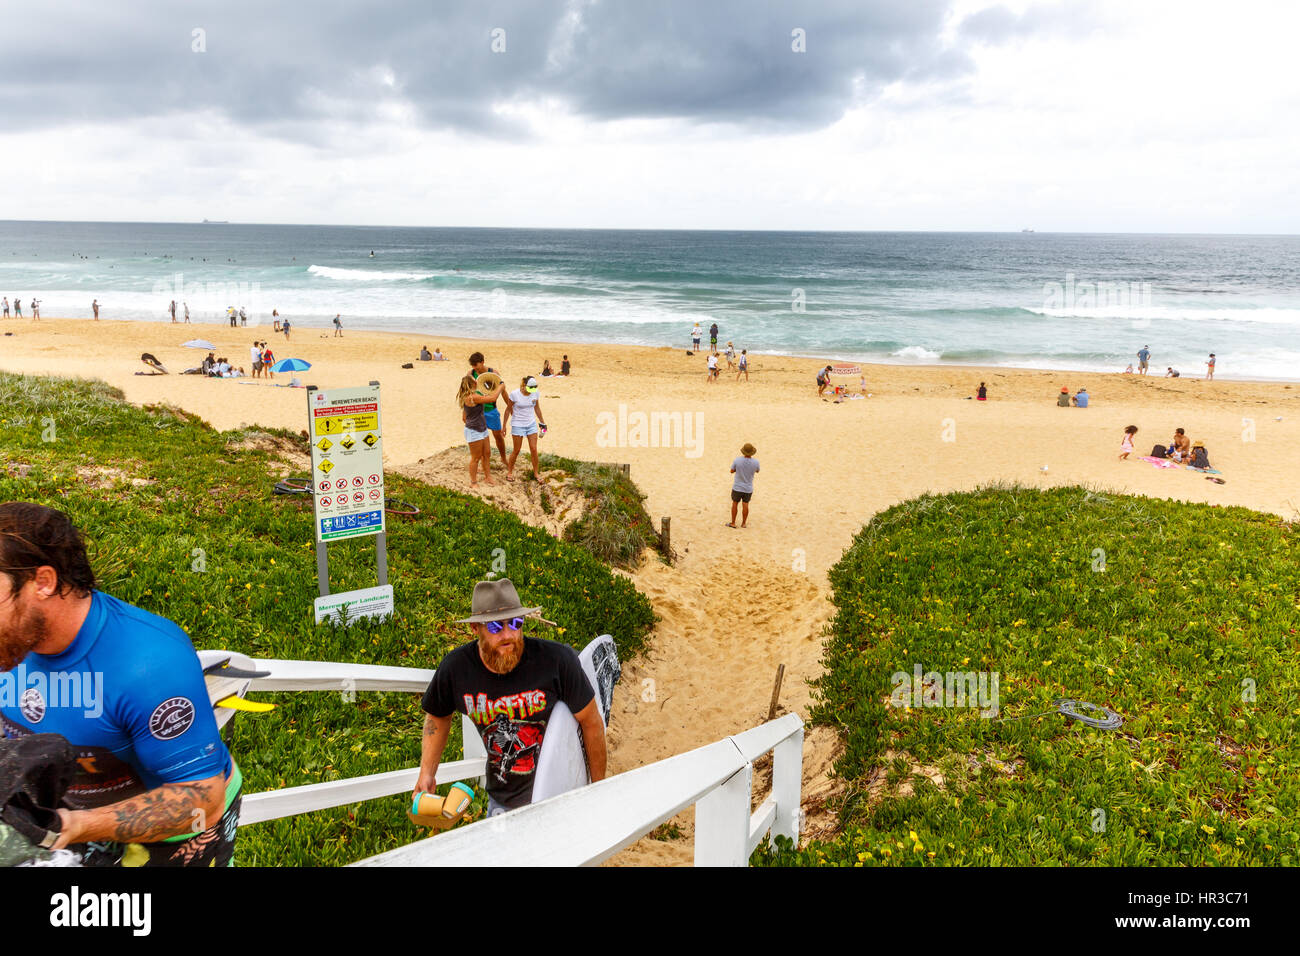 Two surfers leaving Merewether beach in Newcastle,new south wales,australia Stock Photo